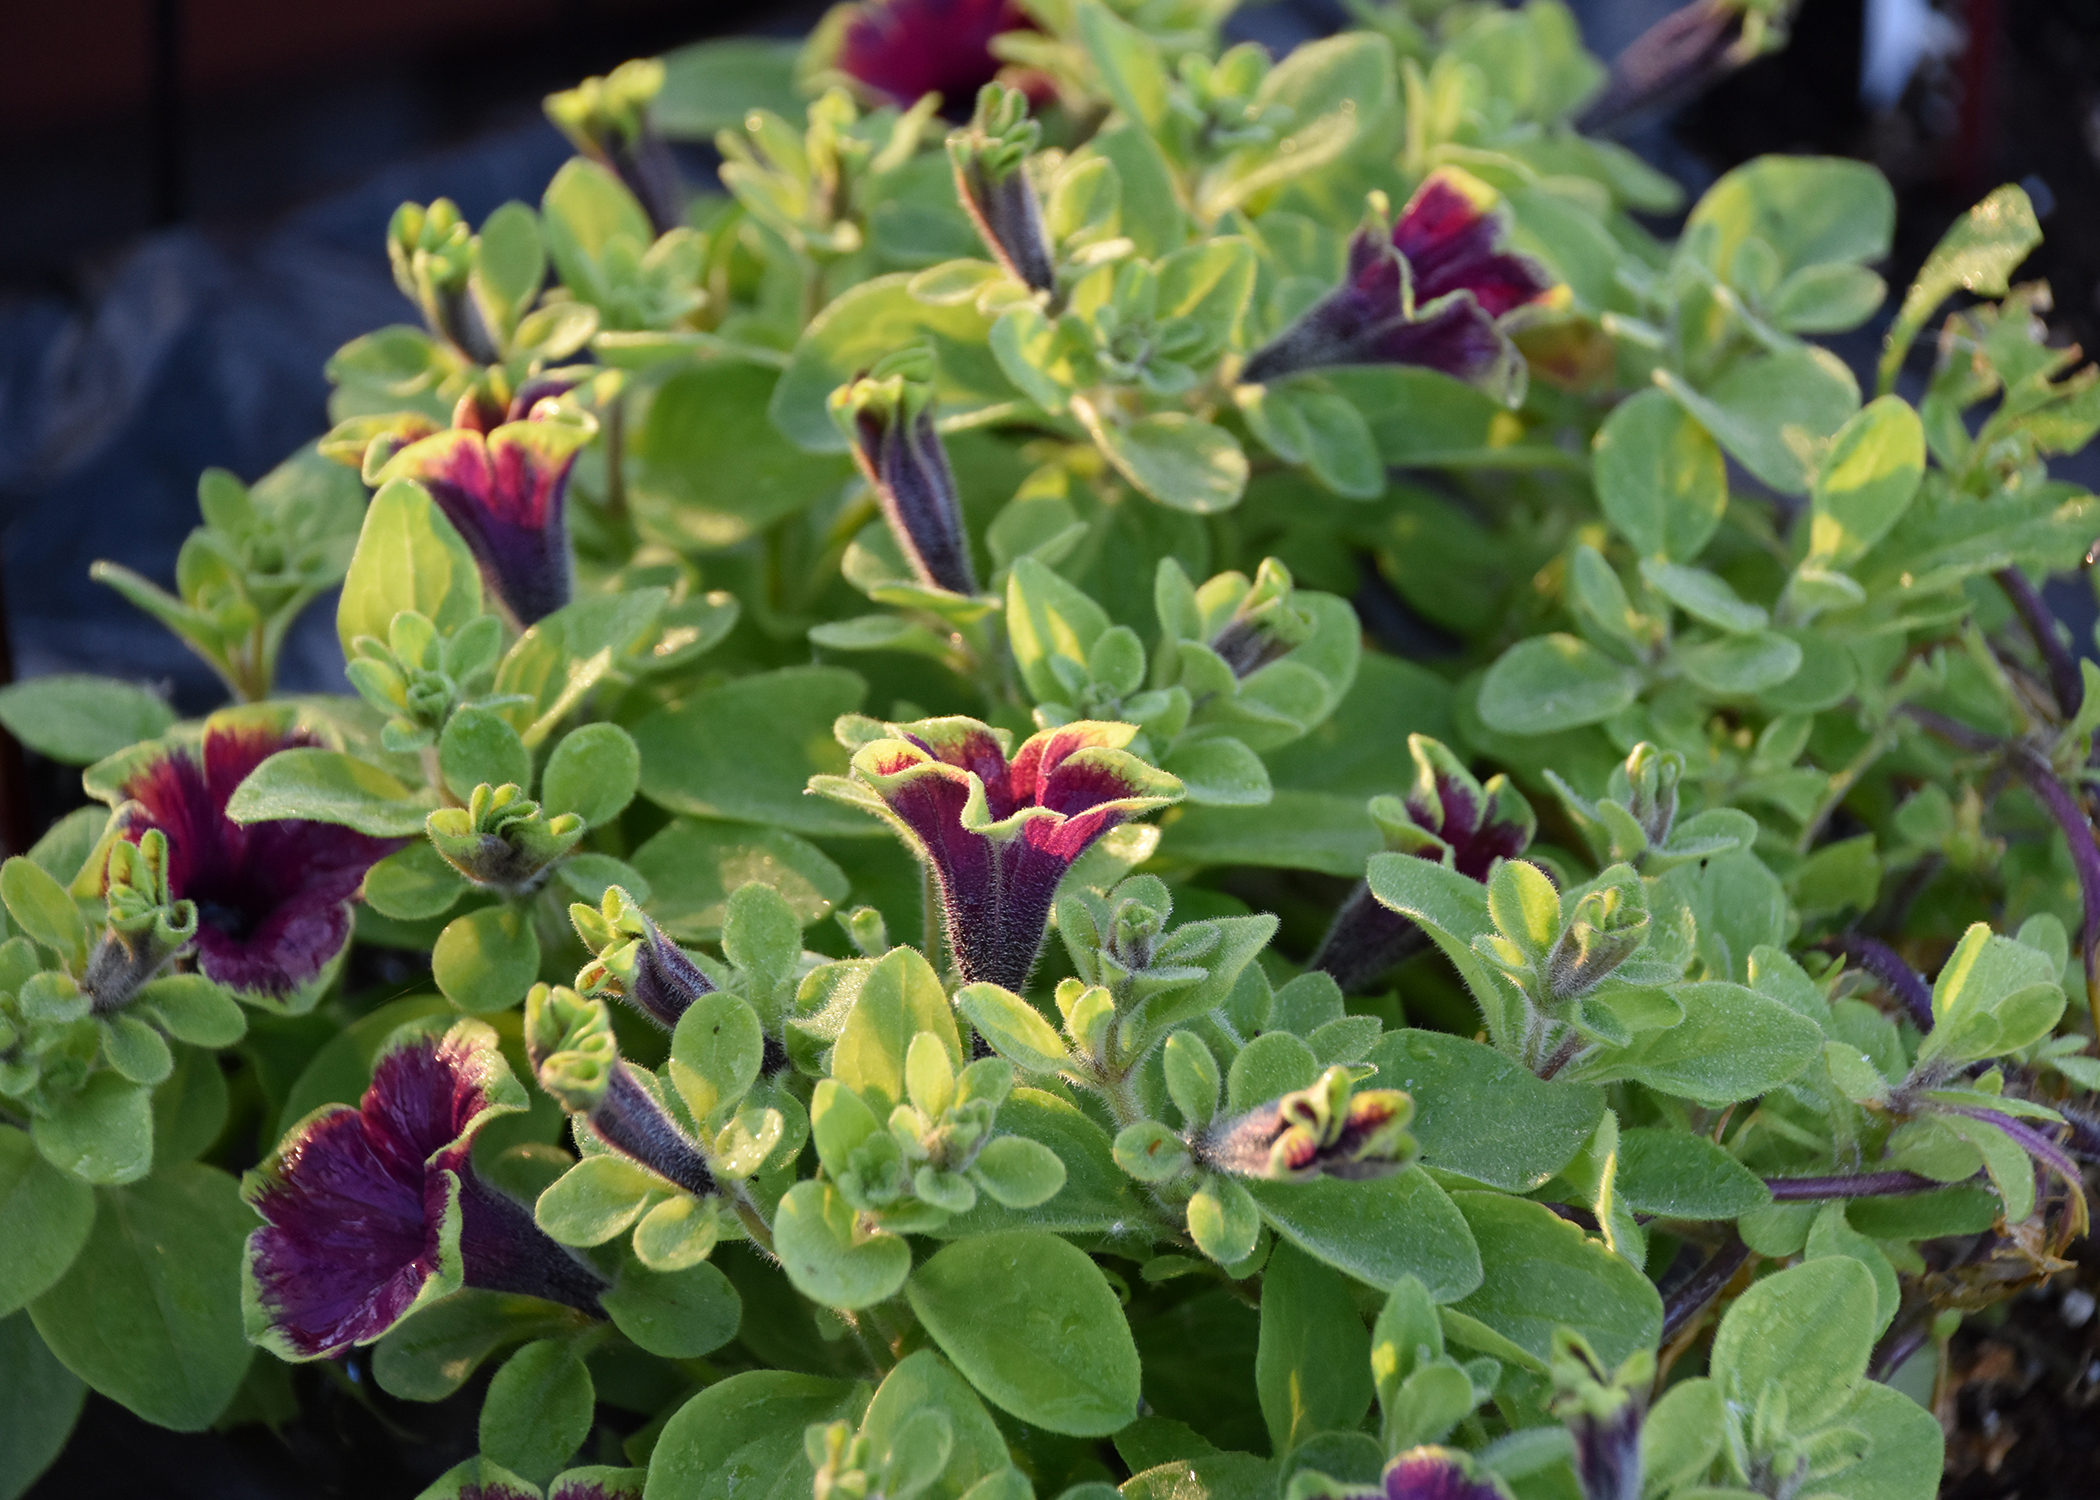 Supertunia flower edges are lime green and tend to blend into the foliage, allowing the artistically painted flowers to stand out. This Picasso in Burgundy will be available this year. (Photo by MSU Extension/Gary Bachman)